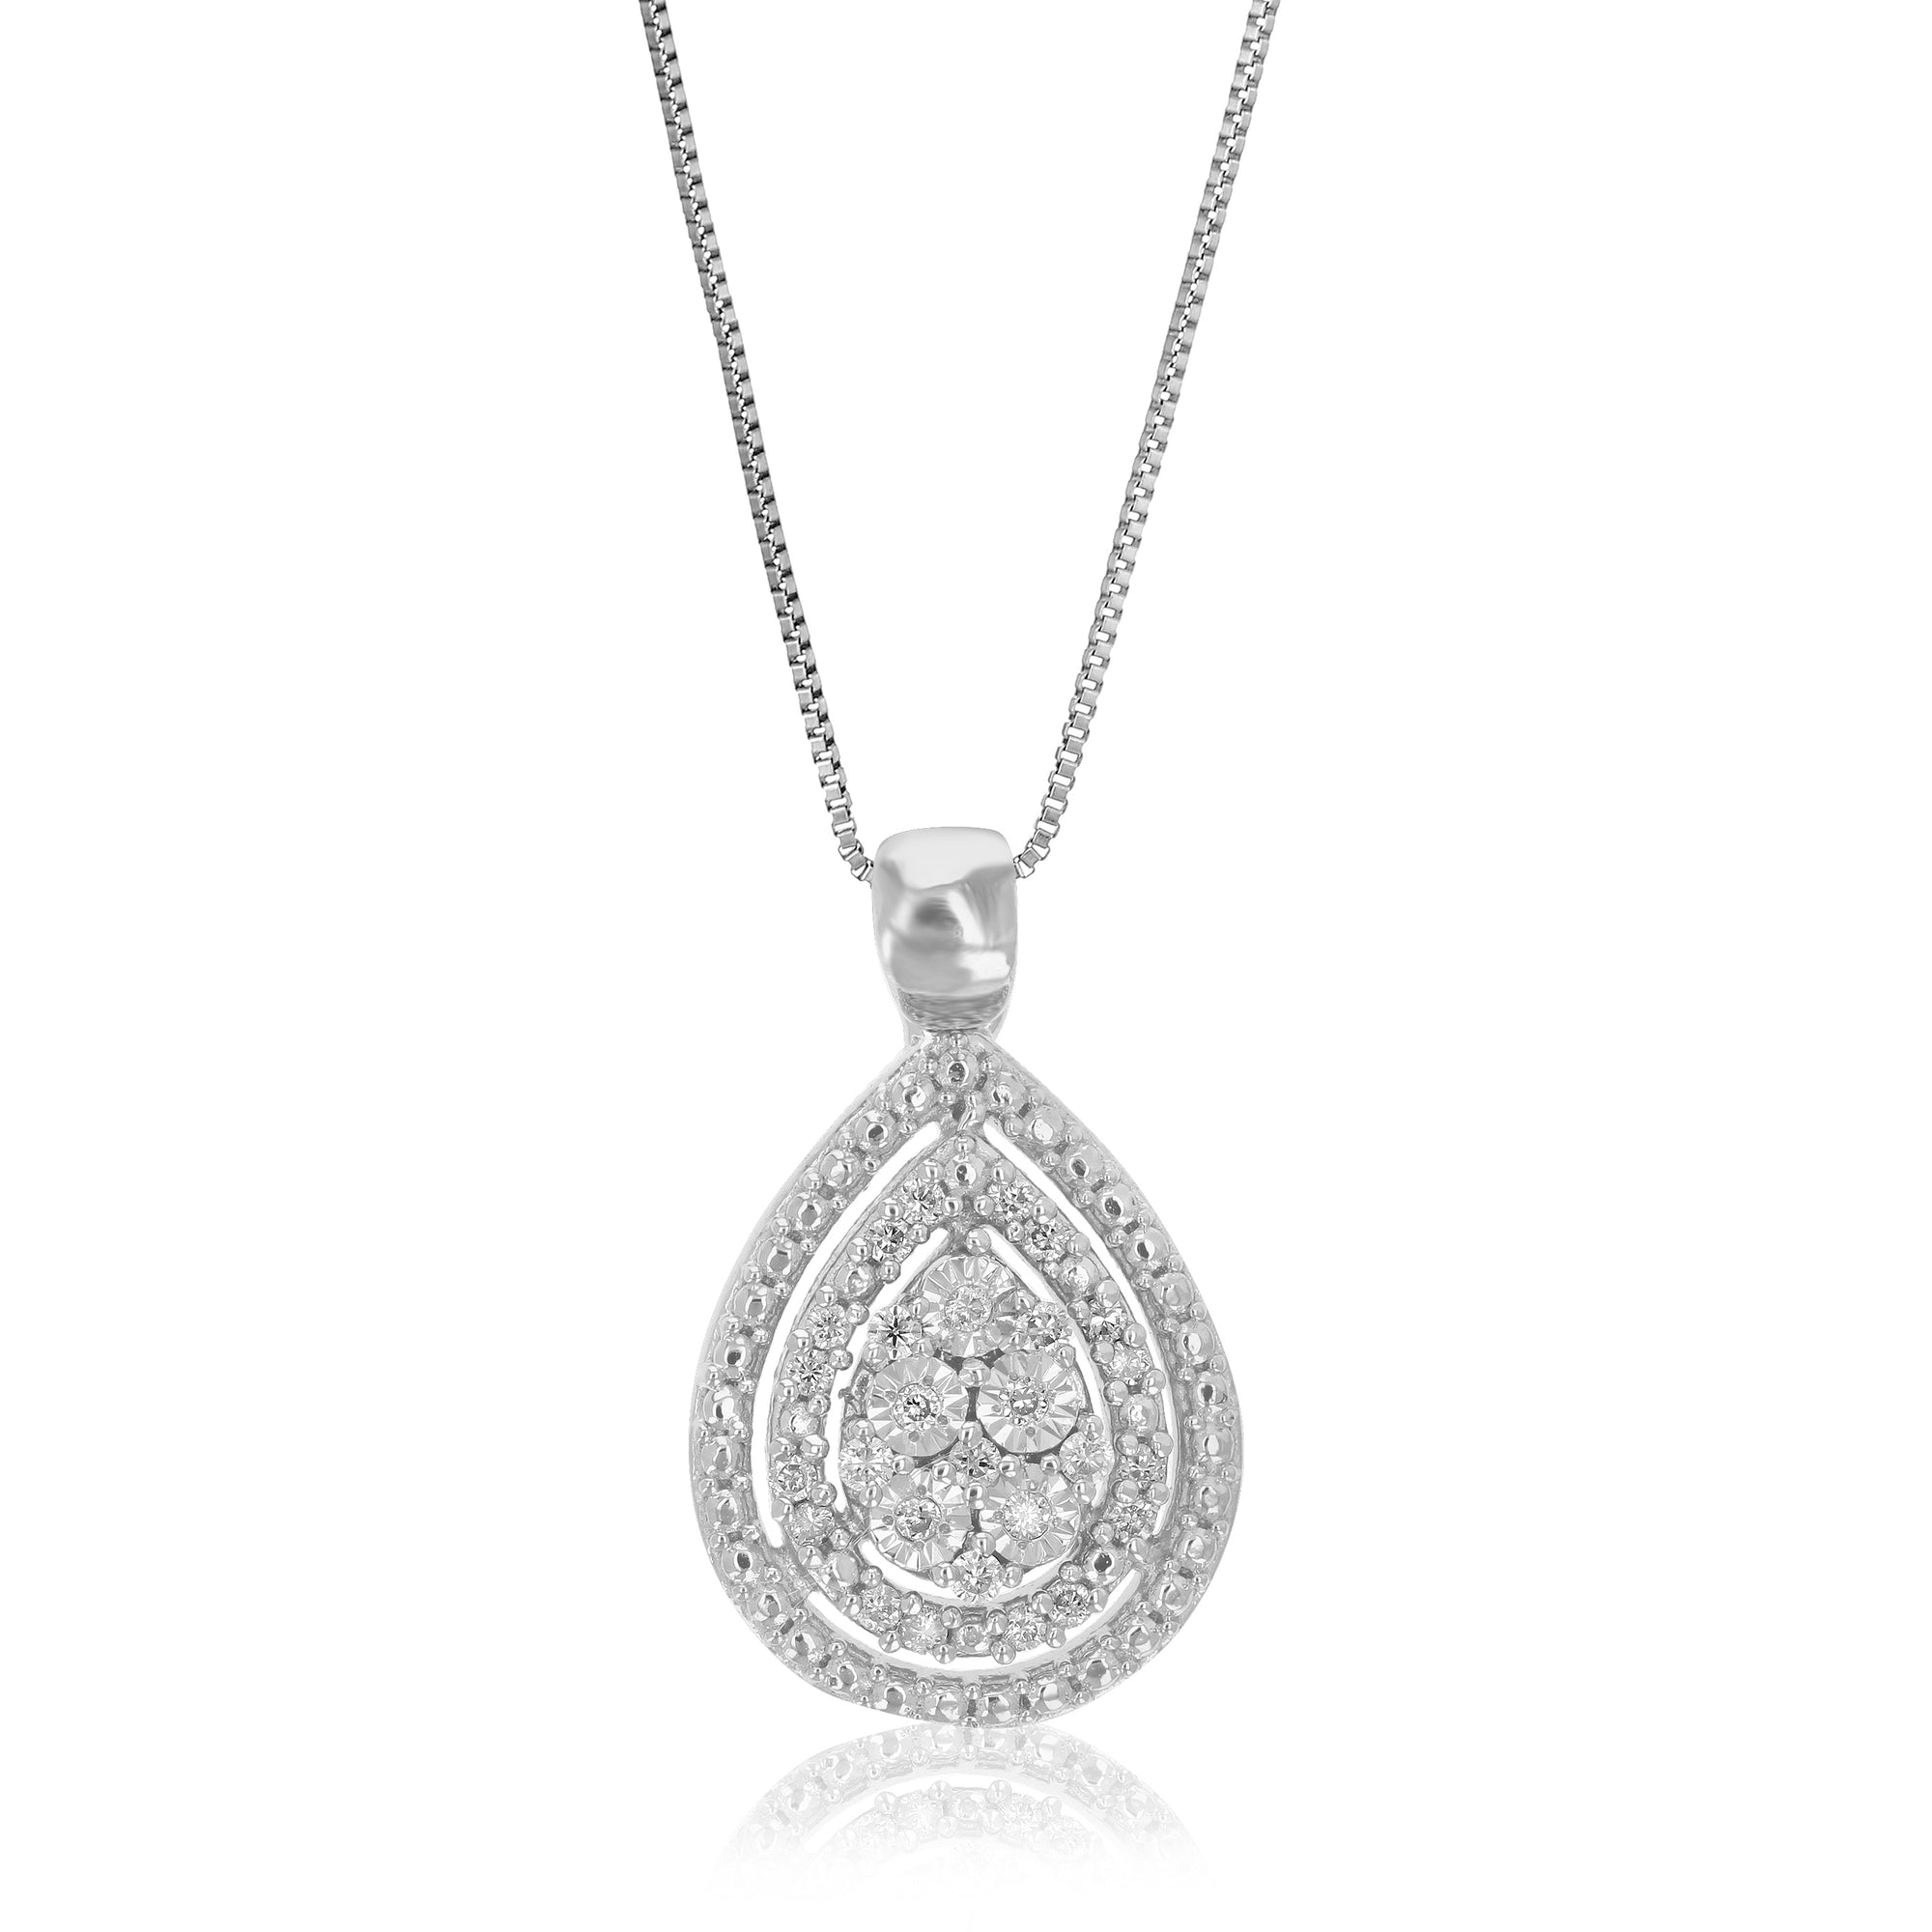 1/10 cttw Diamond Pendant Necklace for Women, Lab Grown Diamond Pear Shape Pendant Necklace in .925 Sterling Silver with Chain, Size 3/4 Inch